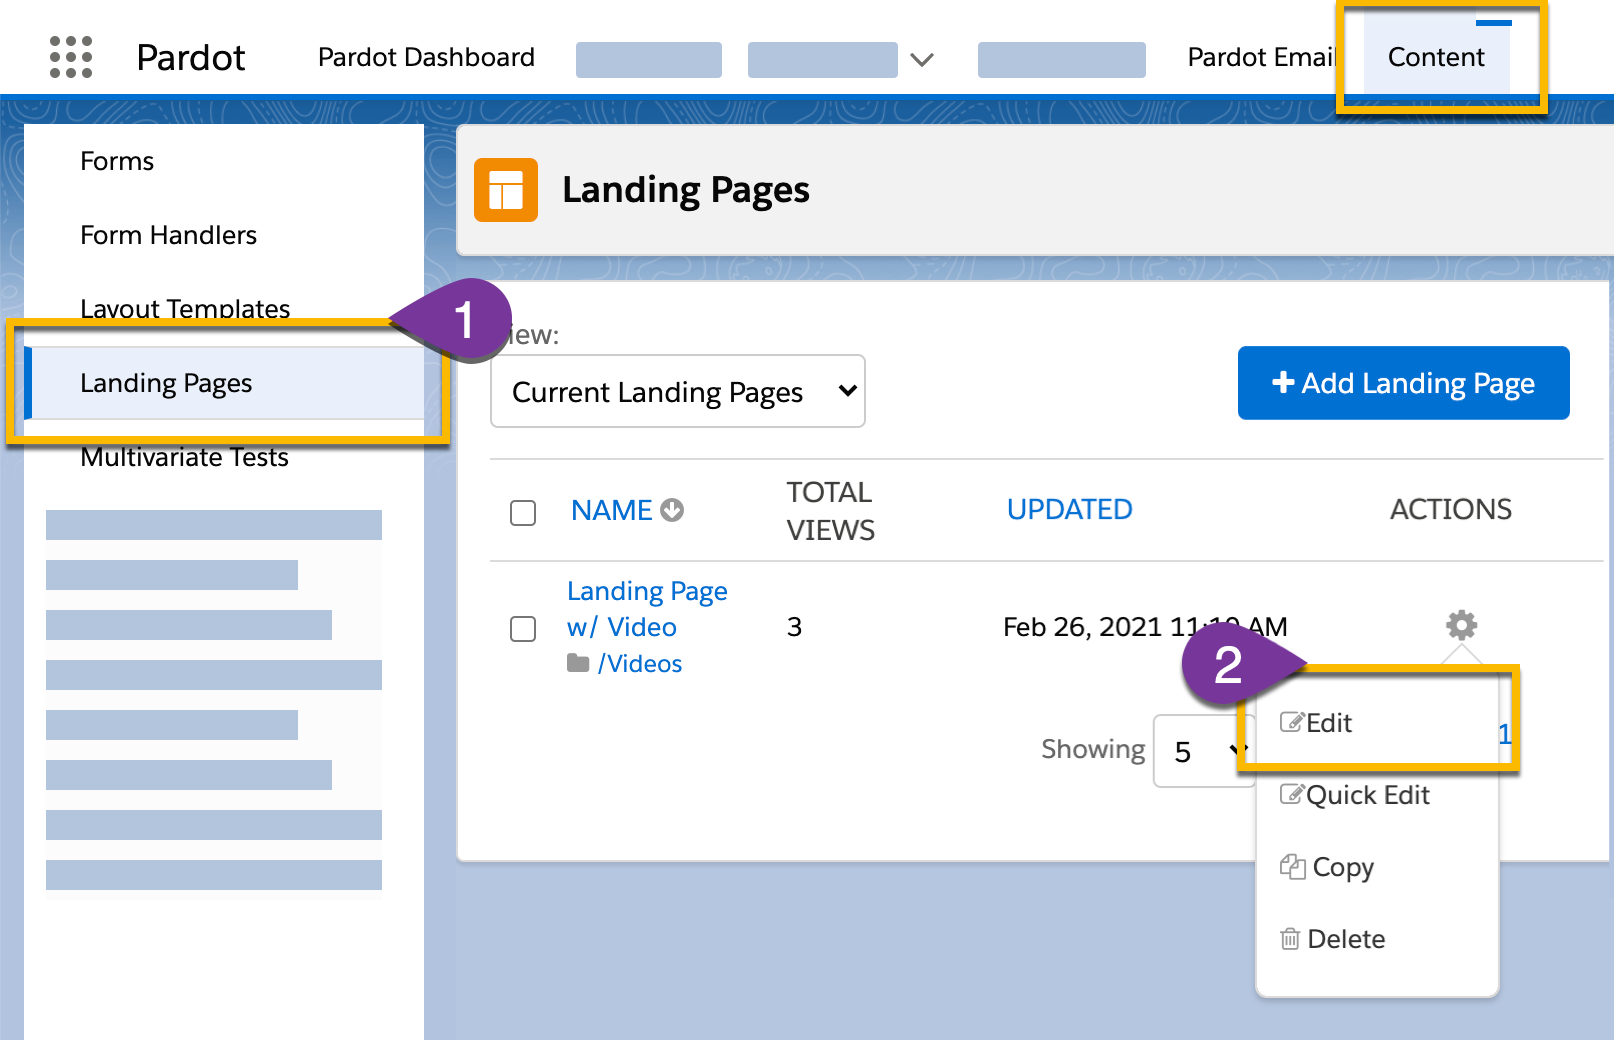 Creating a new Pardot landing page or editing an existing one